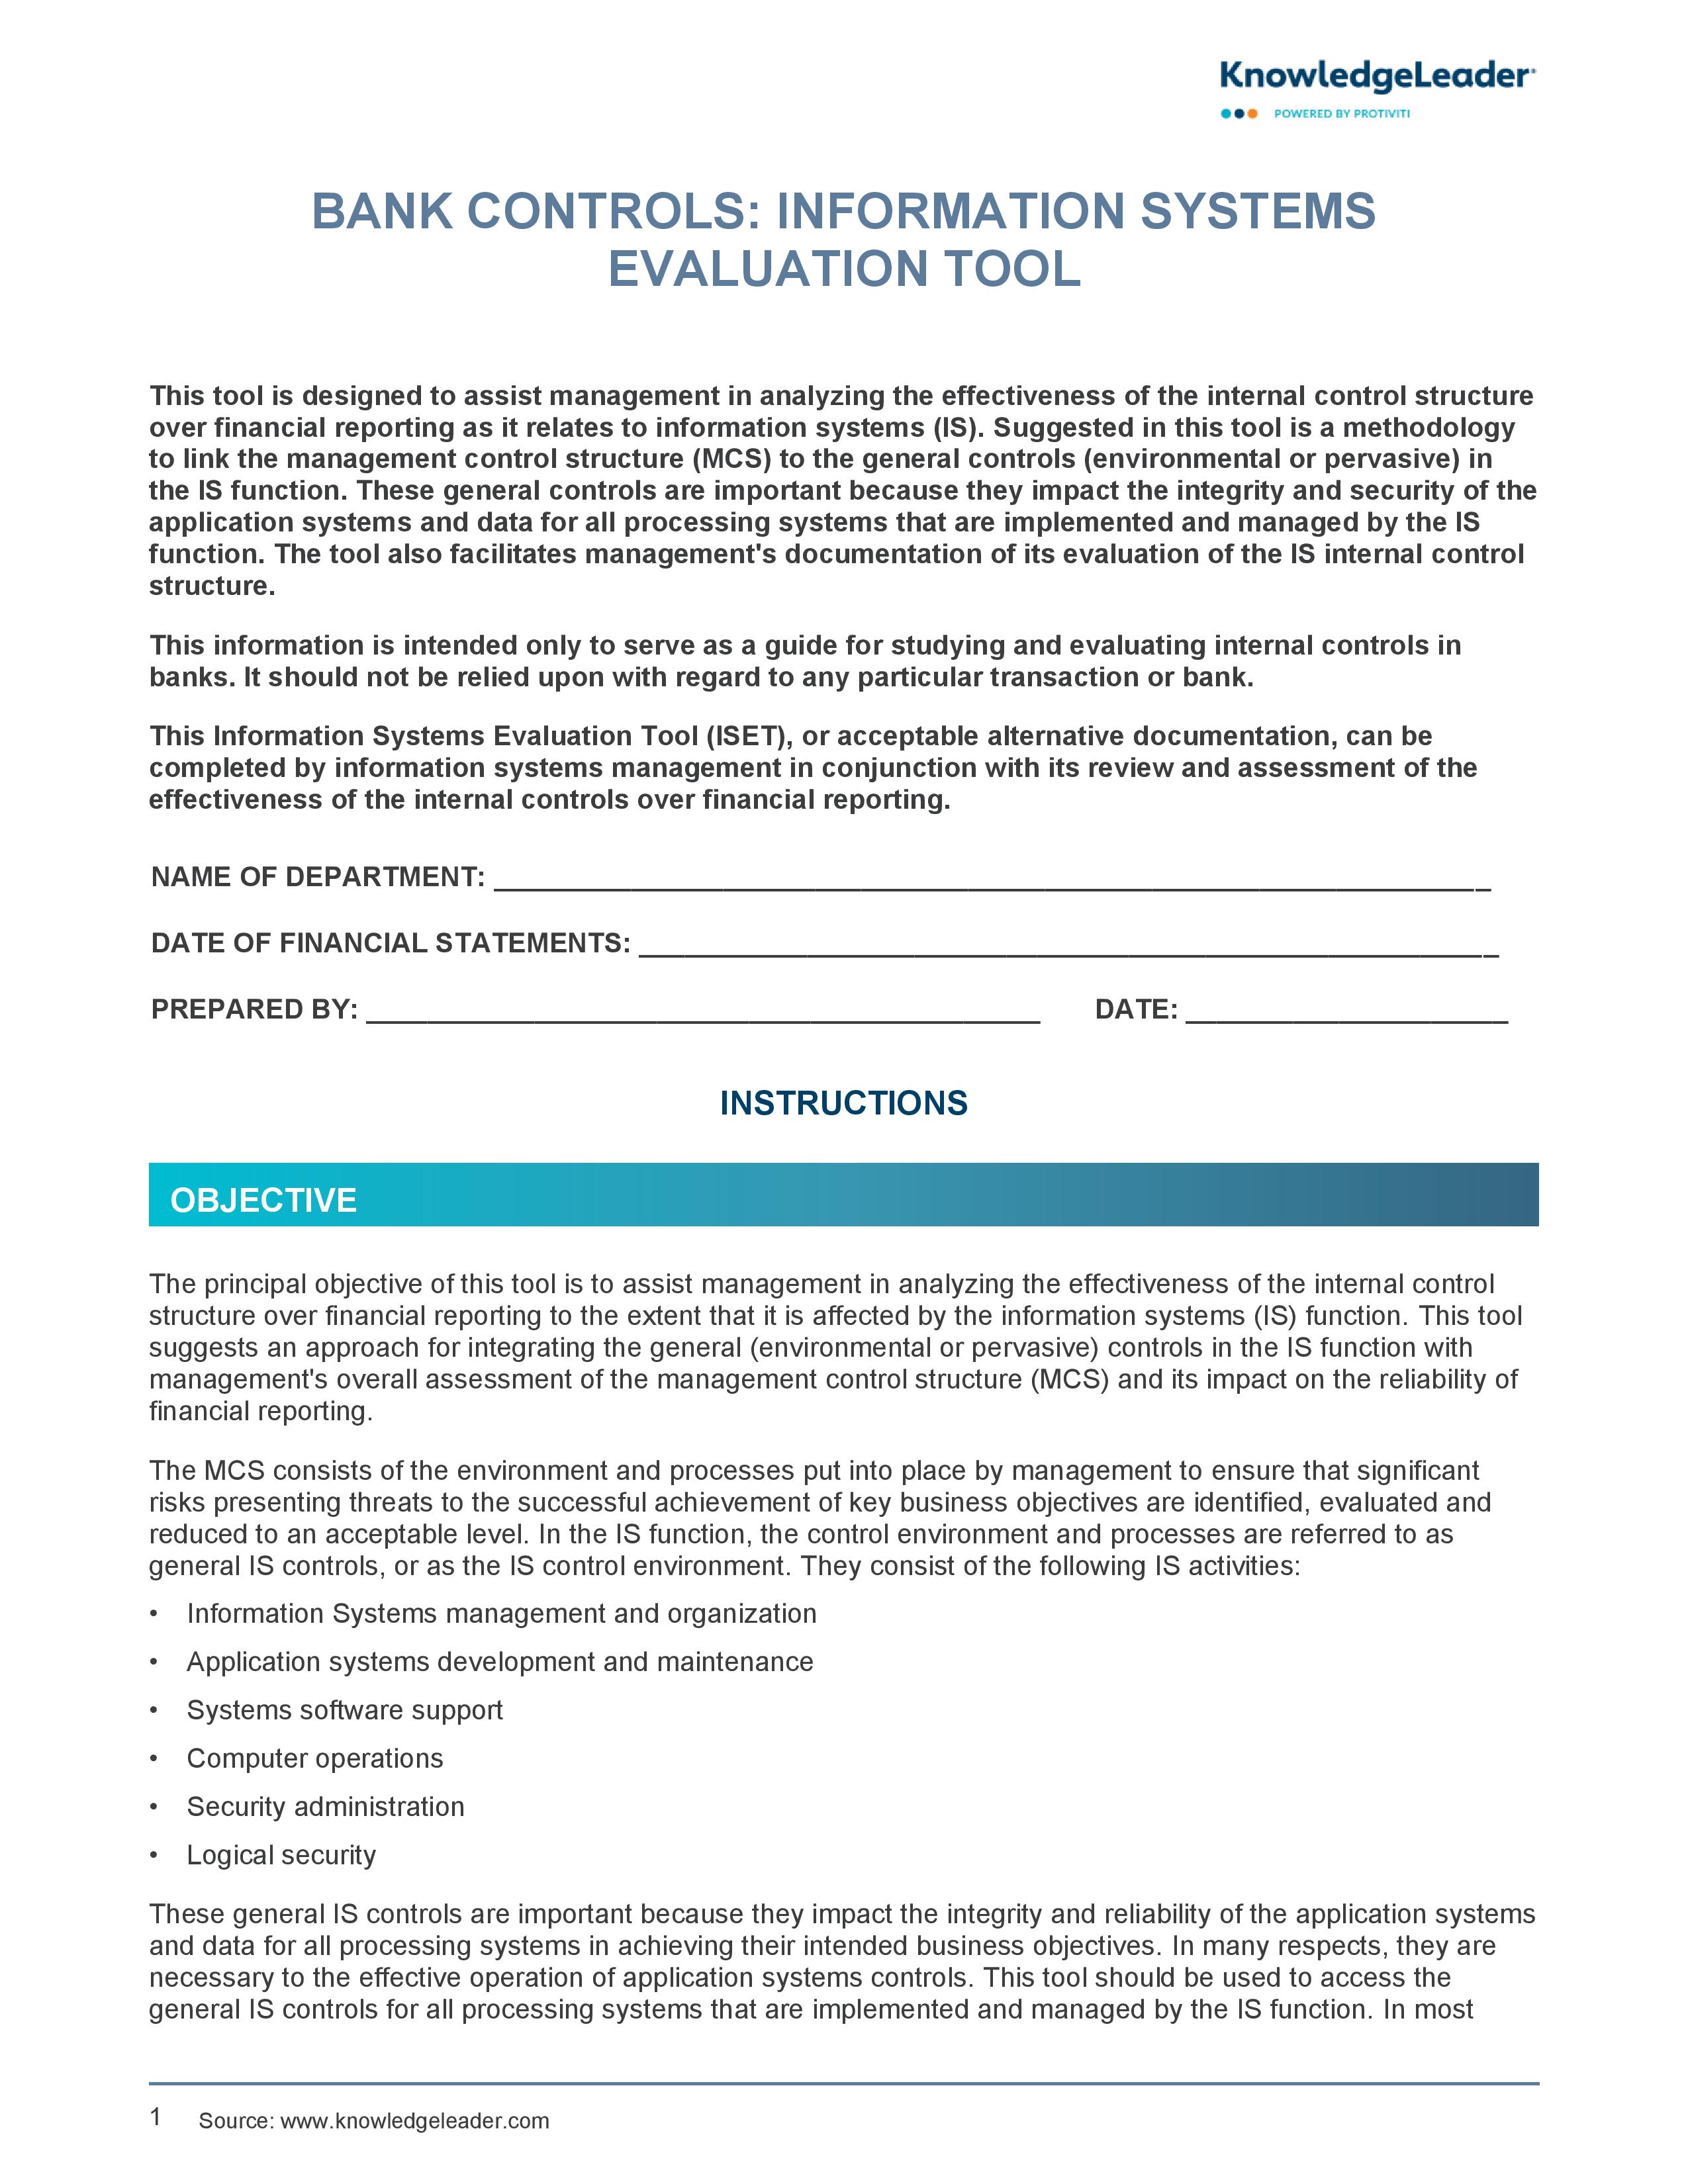 screenshot of the first page of the Bank Controls: Information Systems Evaluation Tool